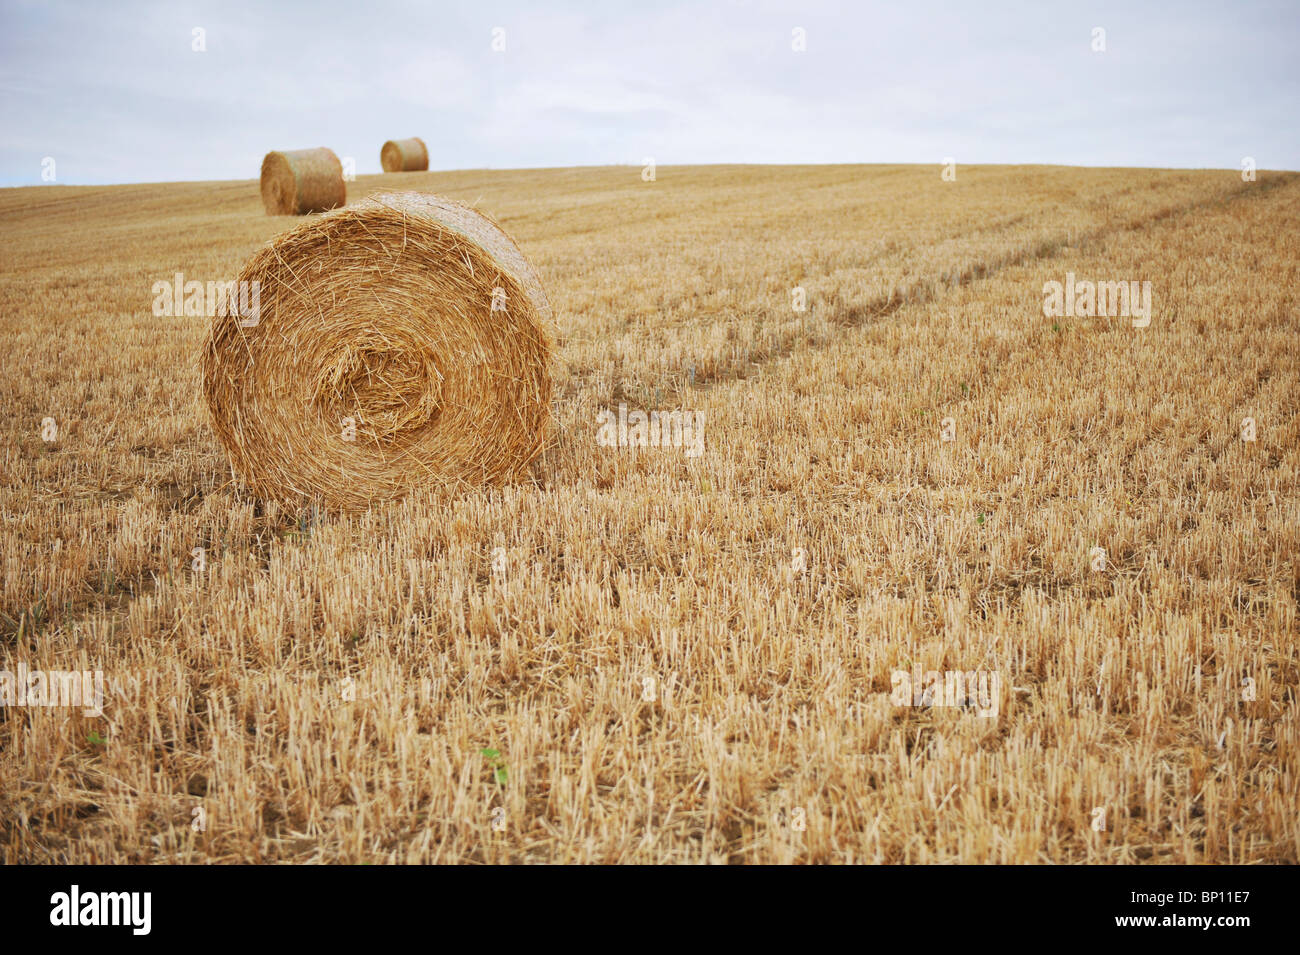 Bales of rolled hay waiting in the field to be collected for storage Stock Photo